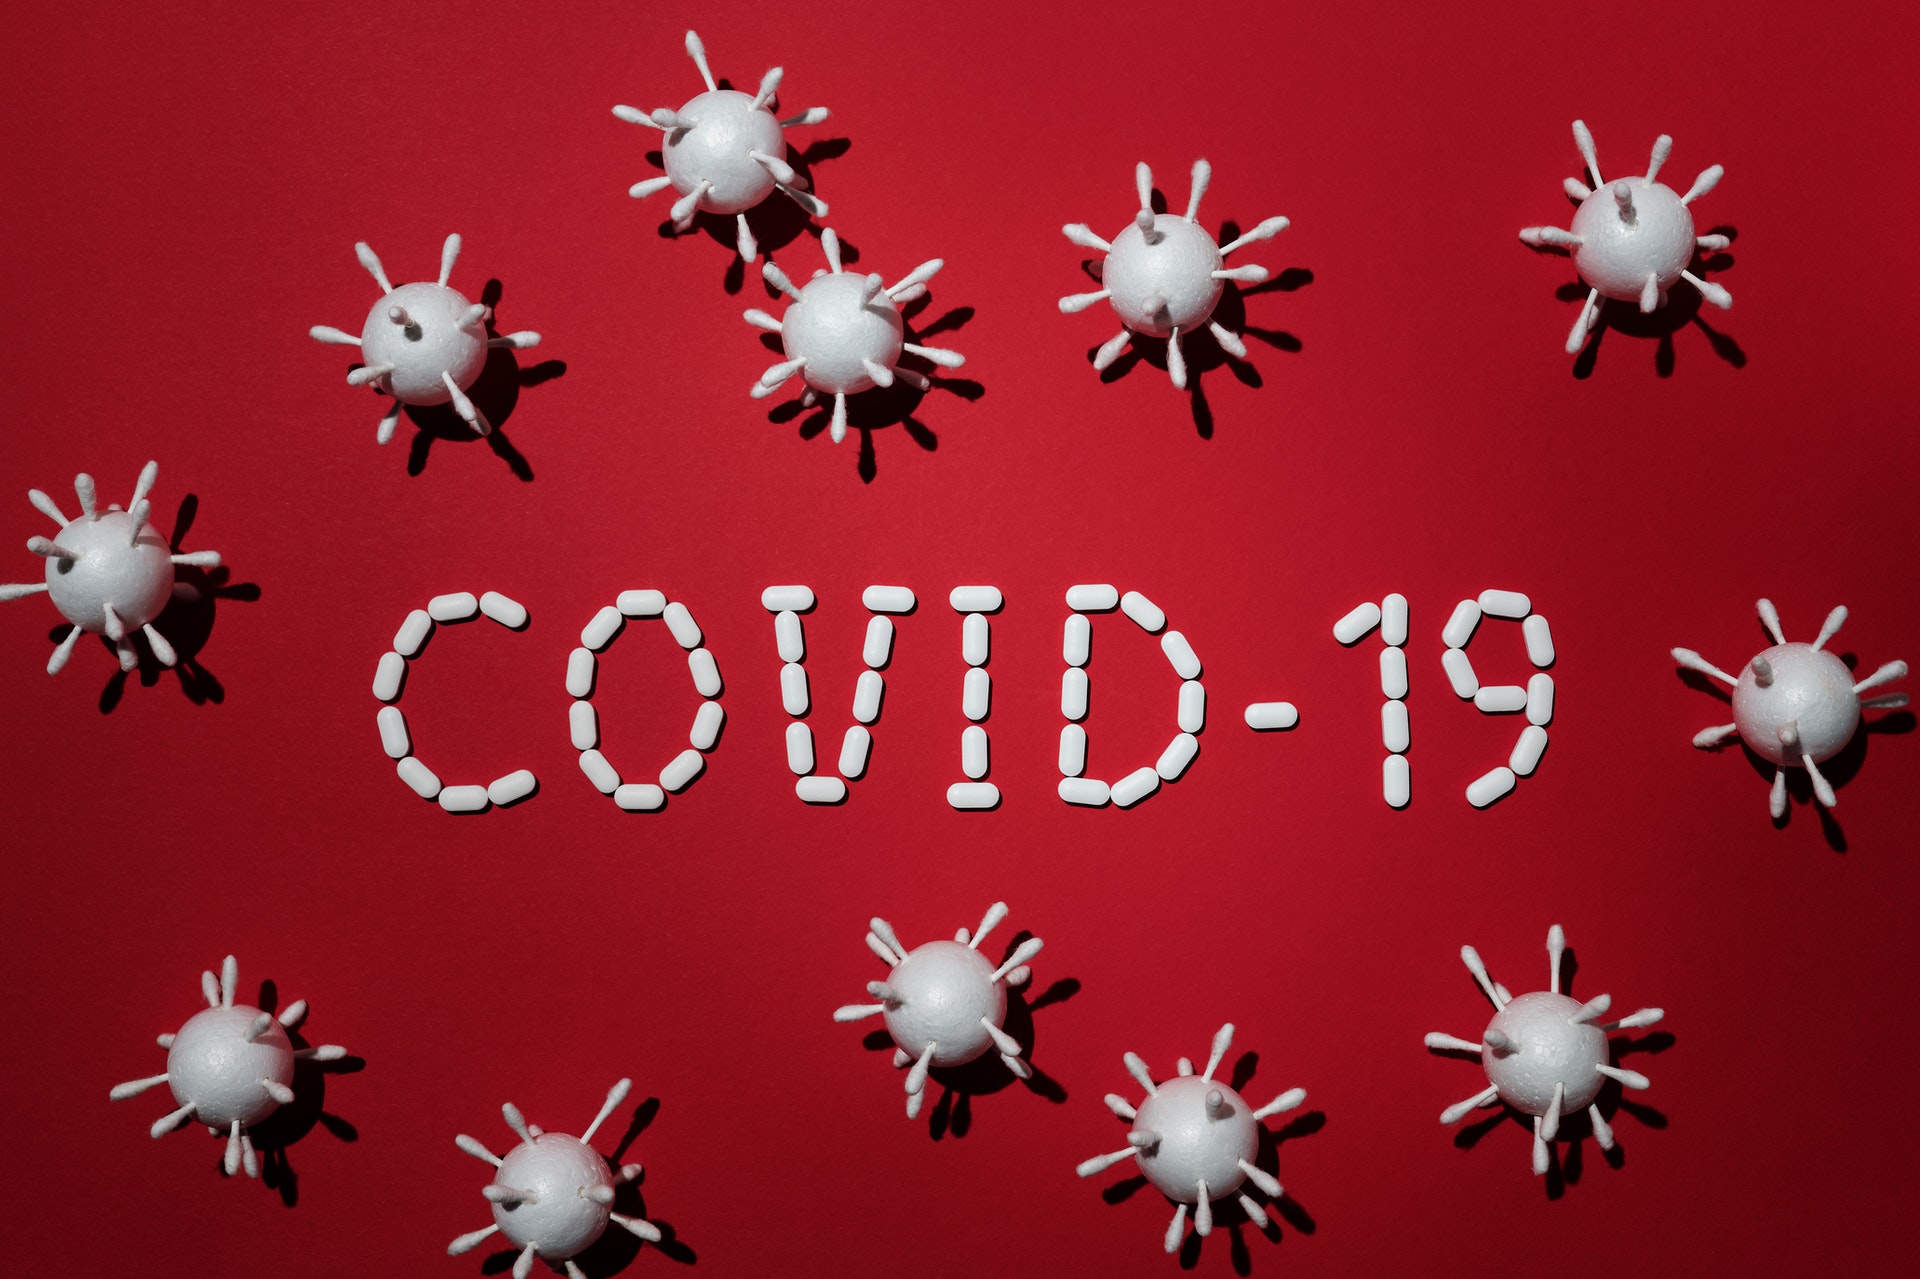 Covid-19 and flu in the winter